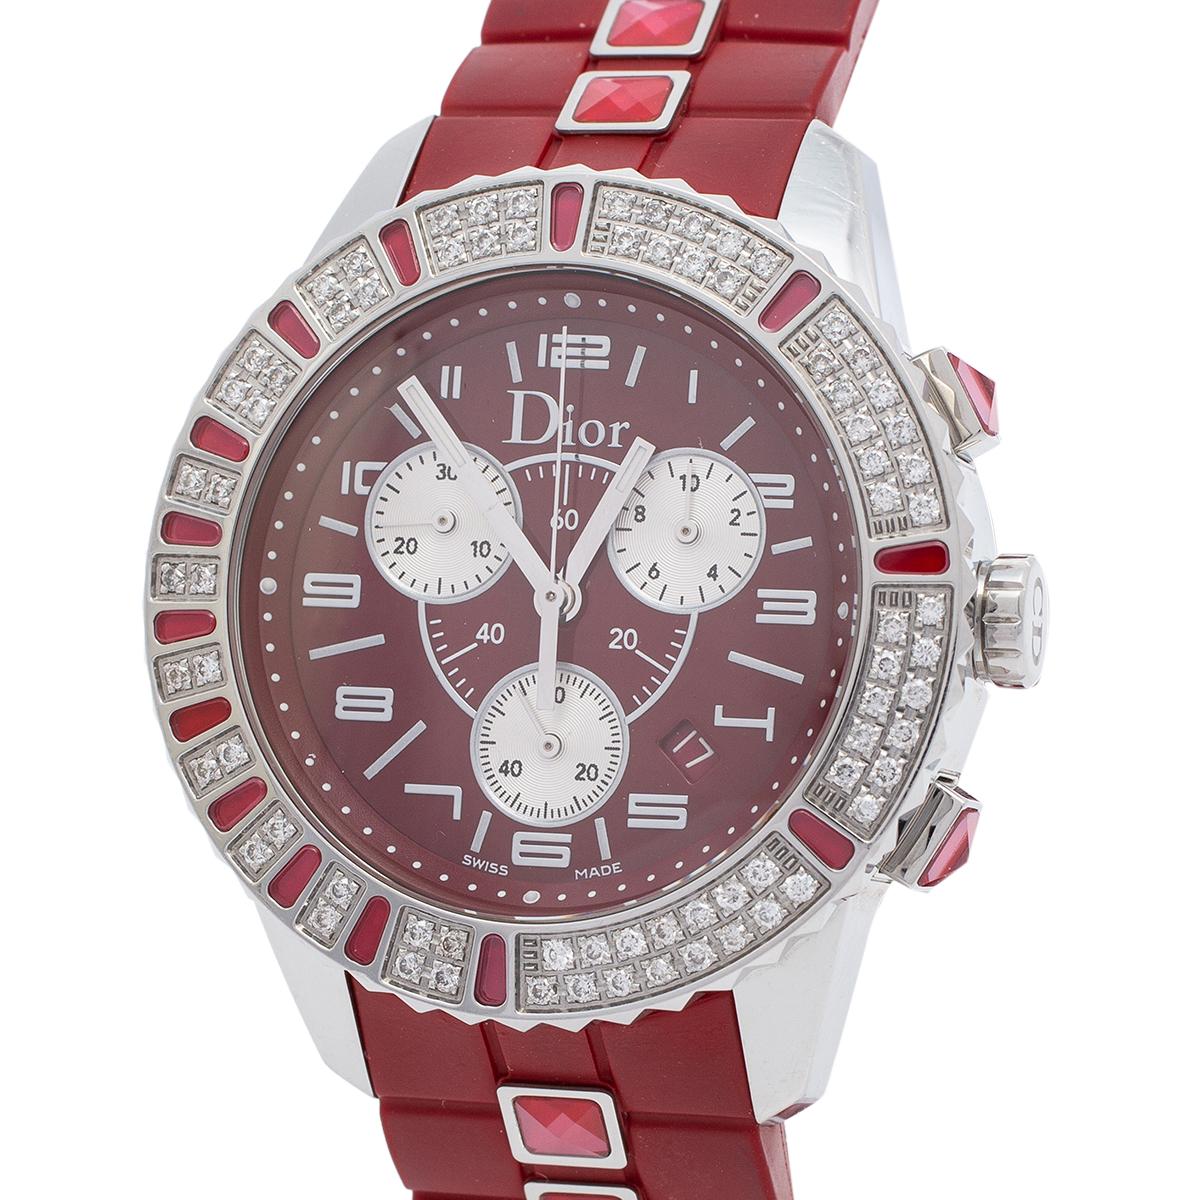 Here's a timepiece to not only assist you with the correct time but also elevate your style quotient. This Dior watch is from their Christal collection, and it is Swiss-made. It is made of stainless steel and embellished with diamonds. The red dial